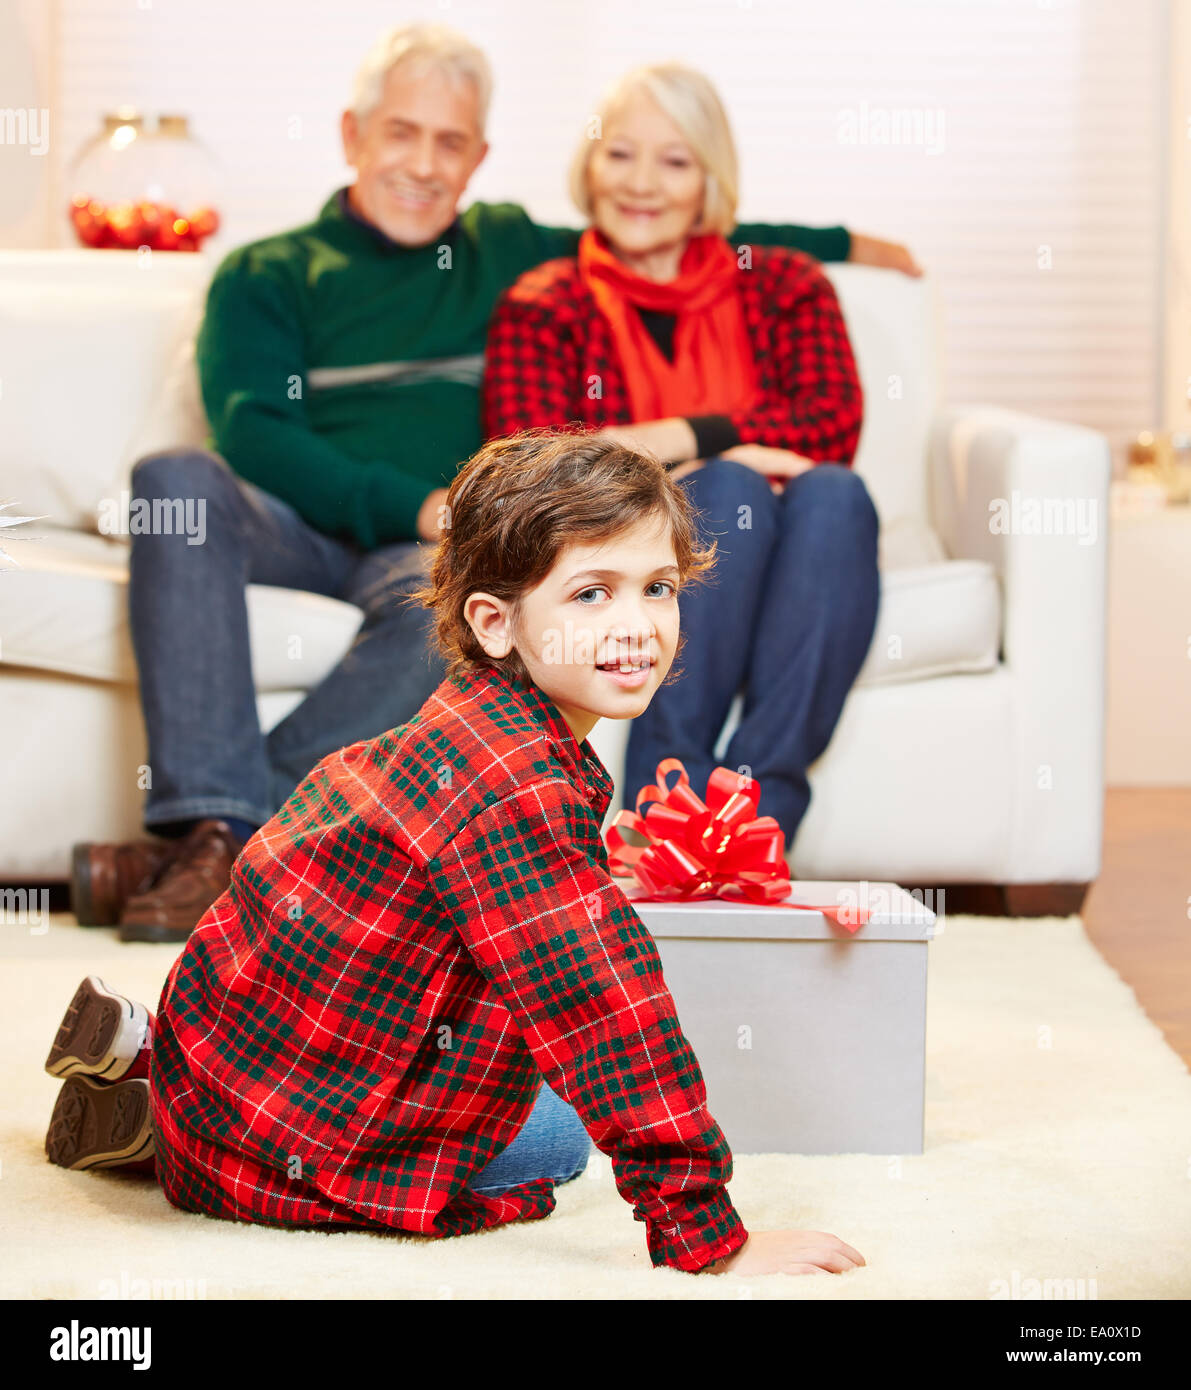 Grandchild opening gift from grandparents at christmas Stock Photo